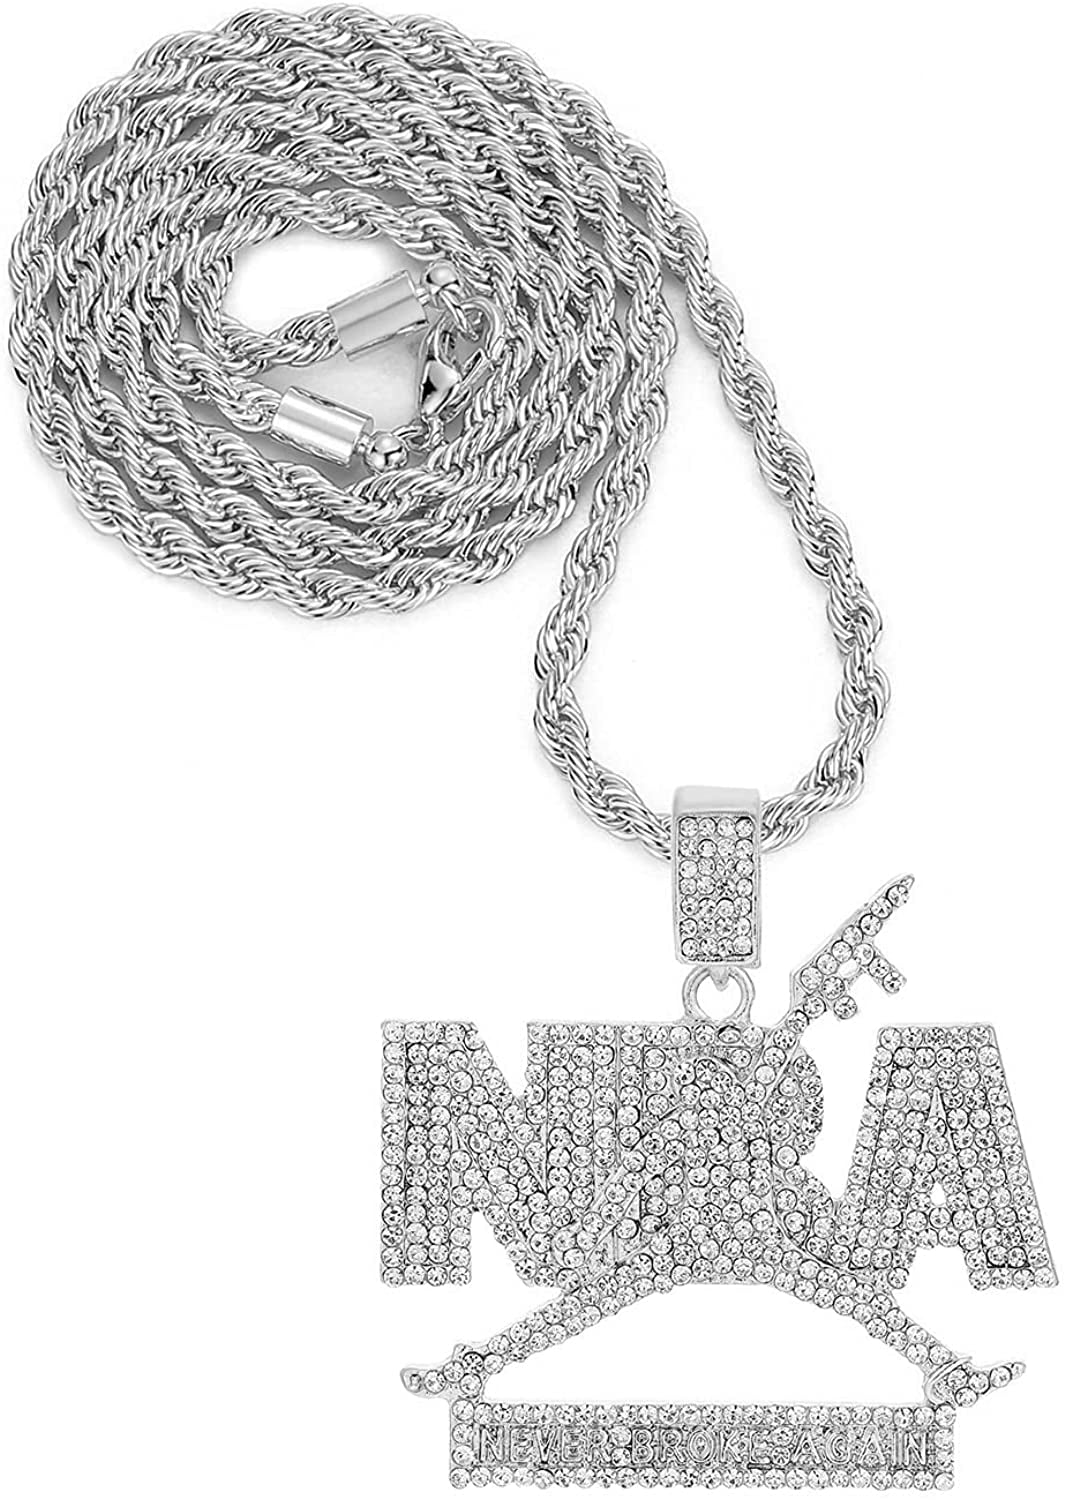 NBA YOUNGBOY 4KT PENDANT SILVER MIAMI CUBAN LINK CHAIN NECKLACE RAP ICED  BLING